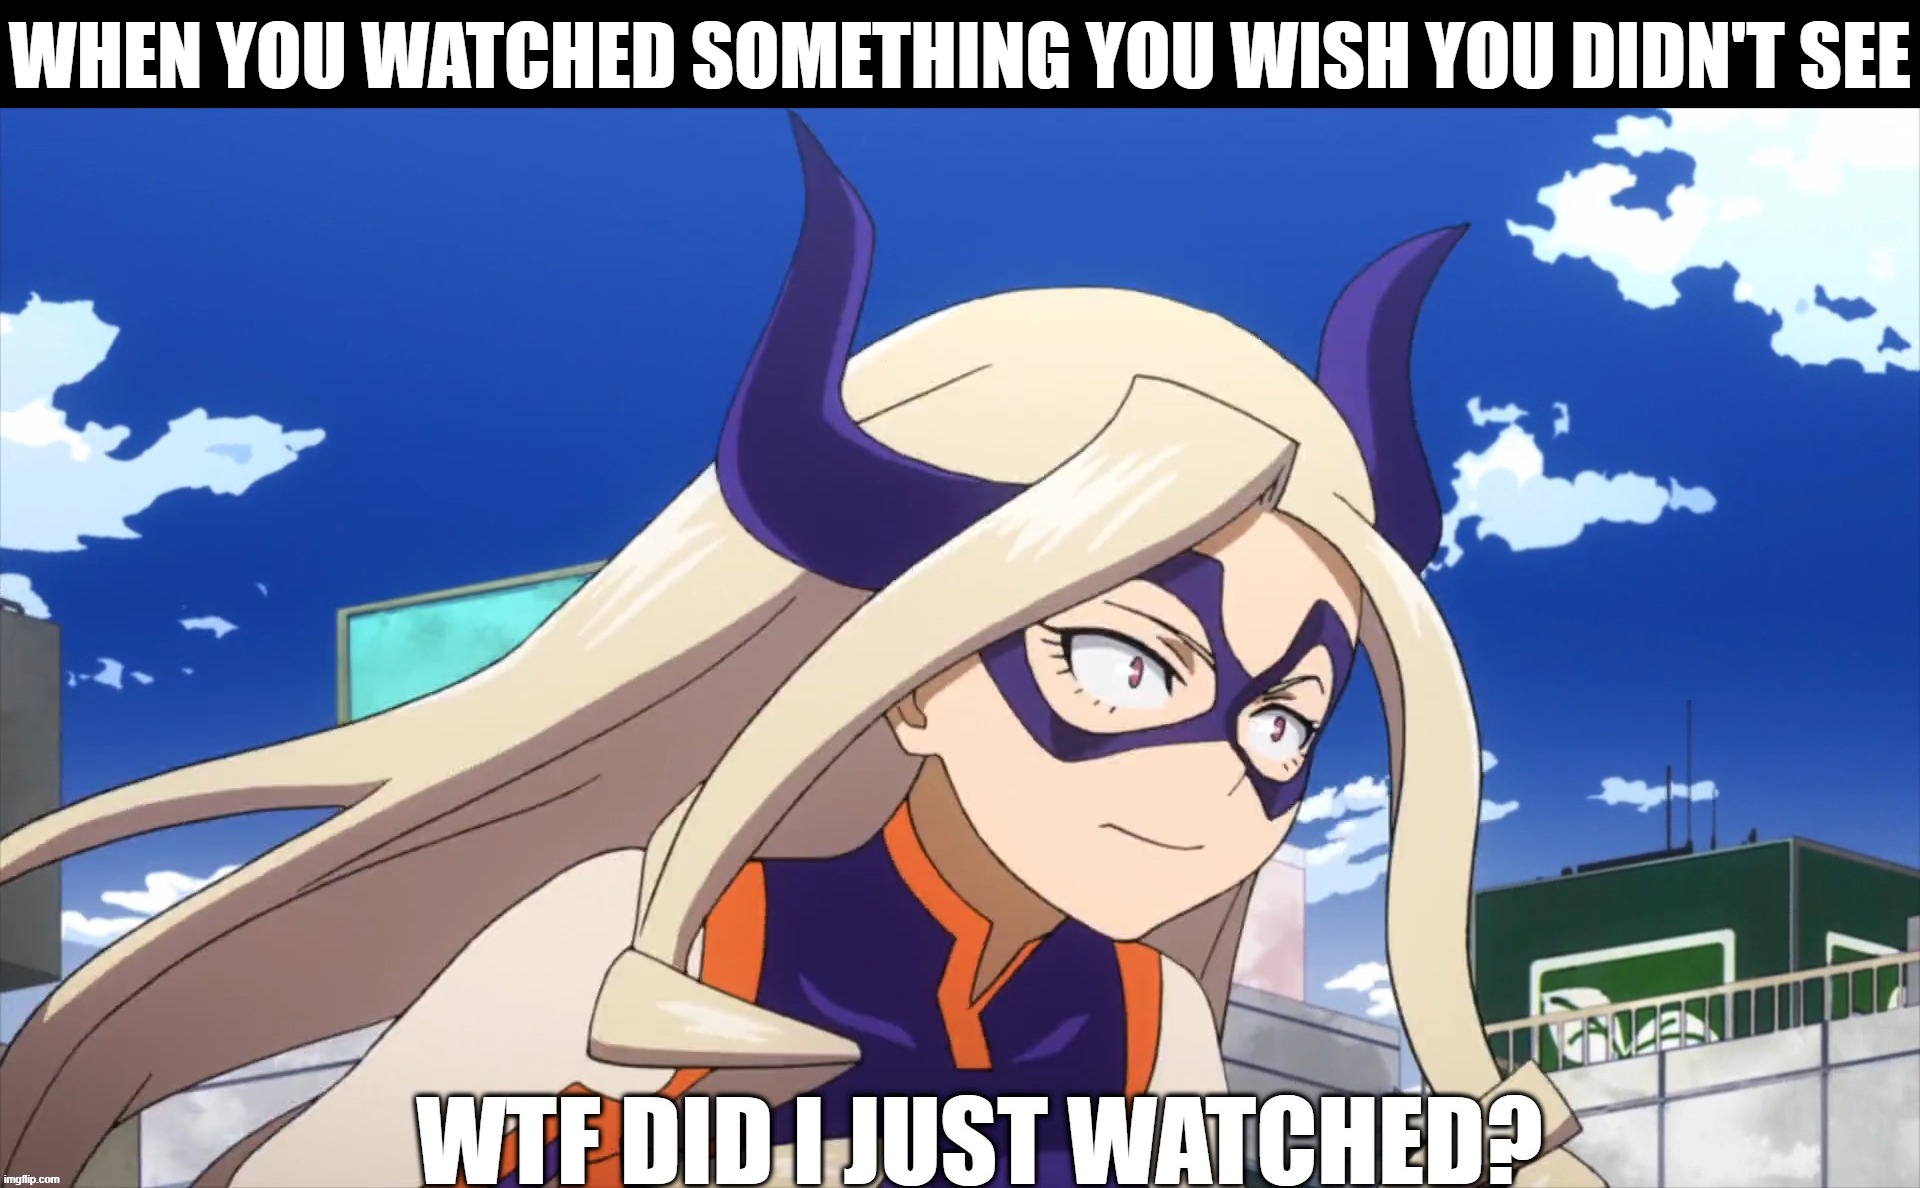 when you watched something you wish you didn't see | WHEN YOU WATCHED SOMETHING YOU WISH YOU DIDN'T SEE | image tagged in wtf did i just watched,anime,reaction | made w/ Imgflip meme maker